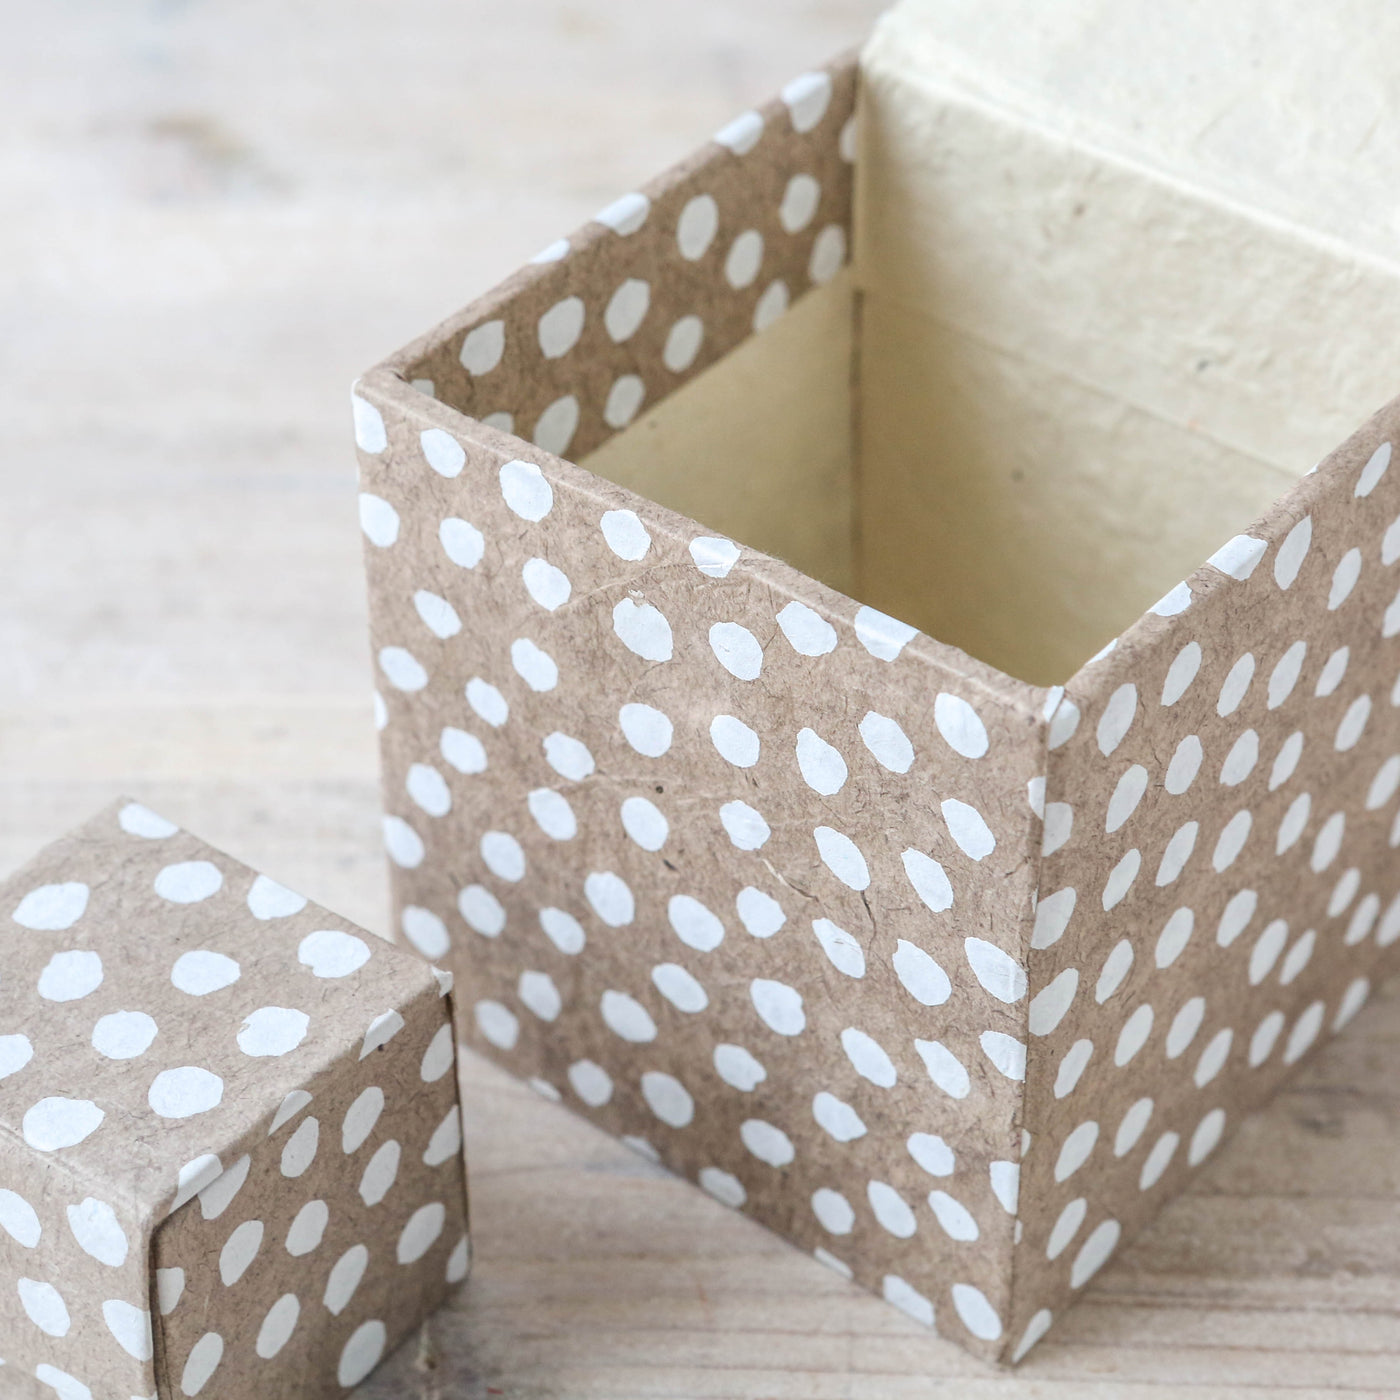 Dotted Paper Box - Beige & White